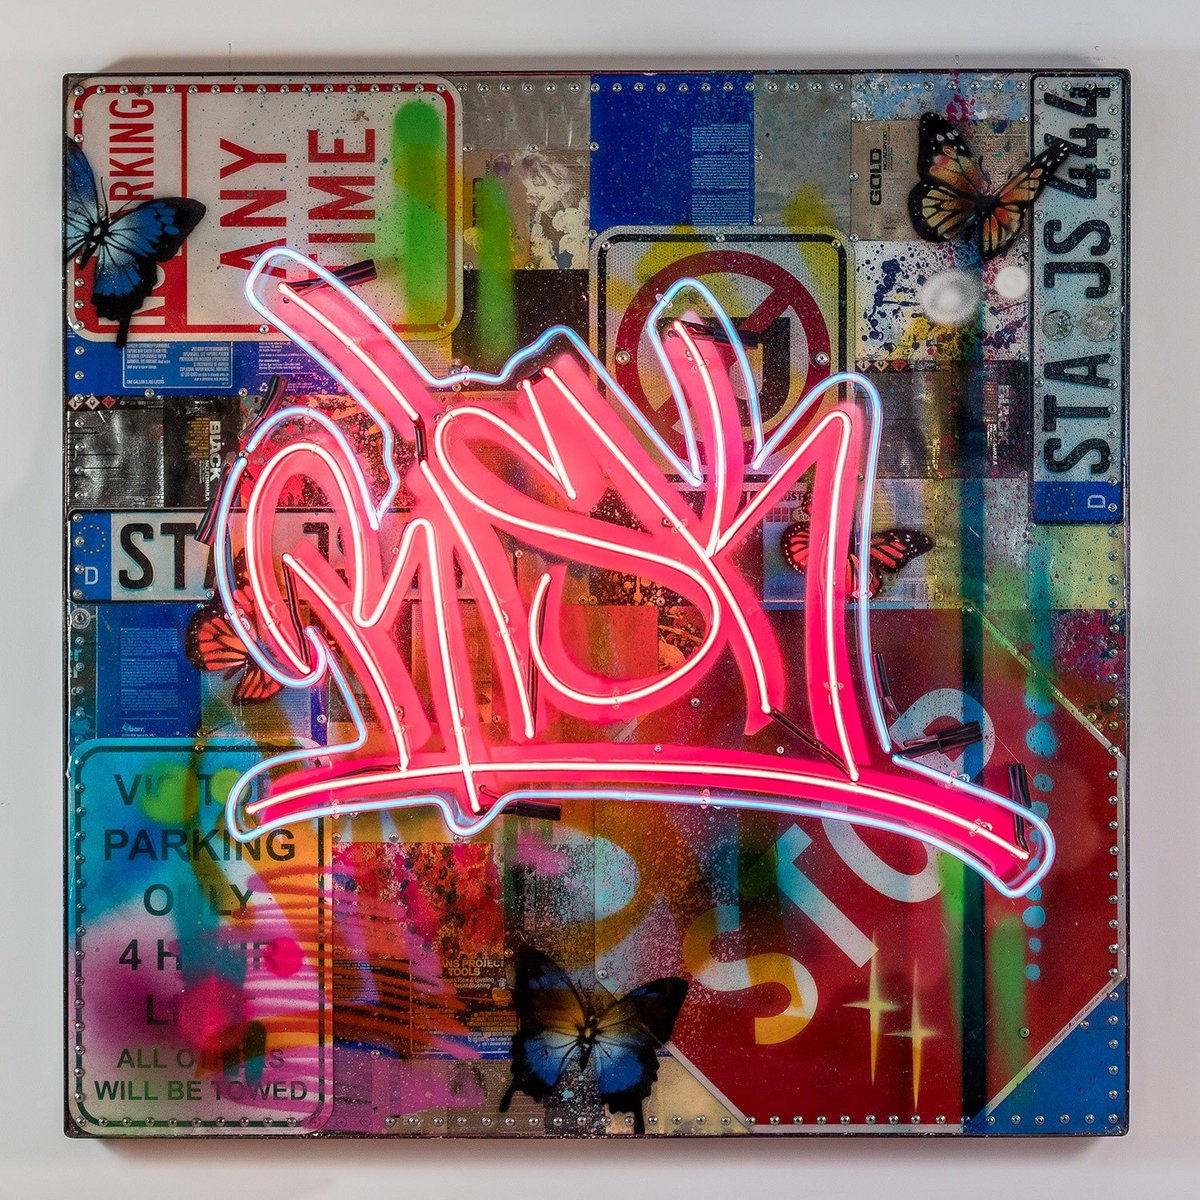 "Multi-talented fine artist, sculptor, and graffiti pioneer Kelly “RISK” Graval has been synonymous with the Los Angeles art community for over 30 years. Risk has solidified his place in the history books as a world-renowned graffiti legend and contemporary artist."